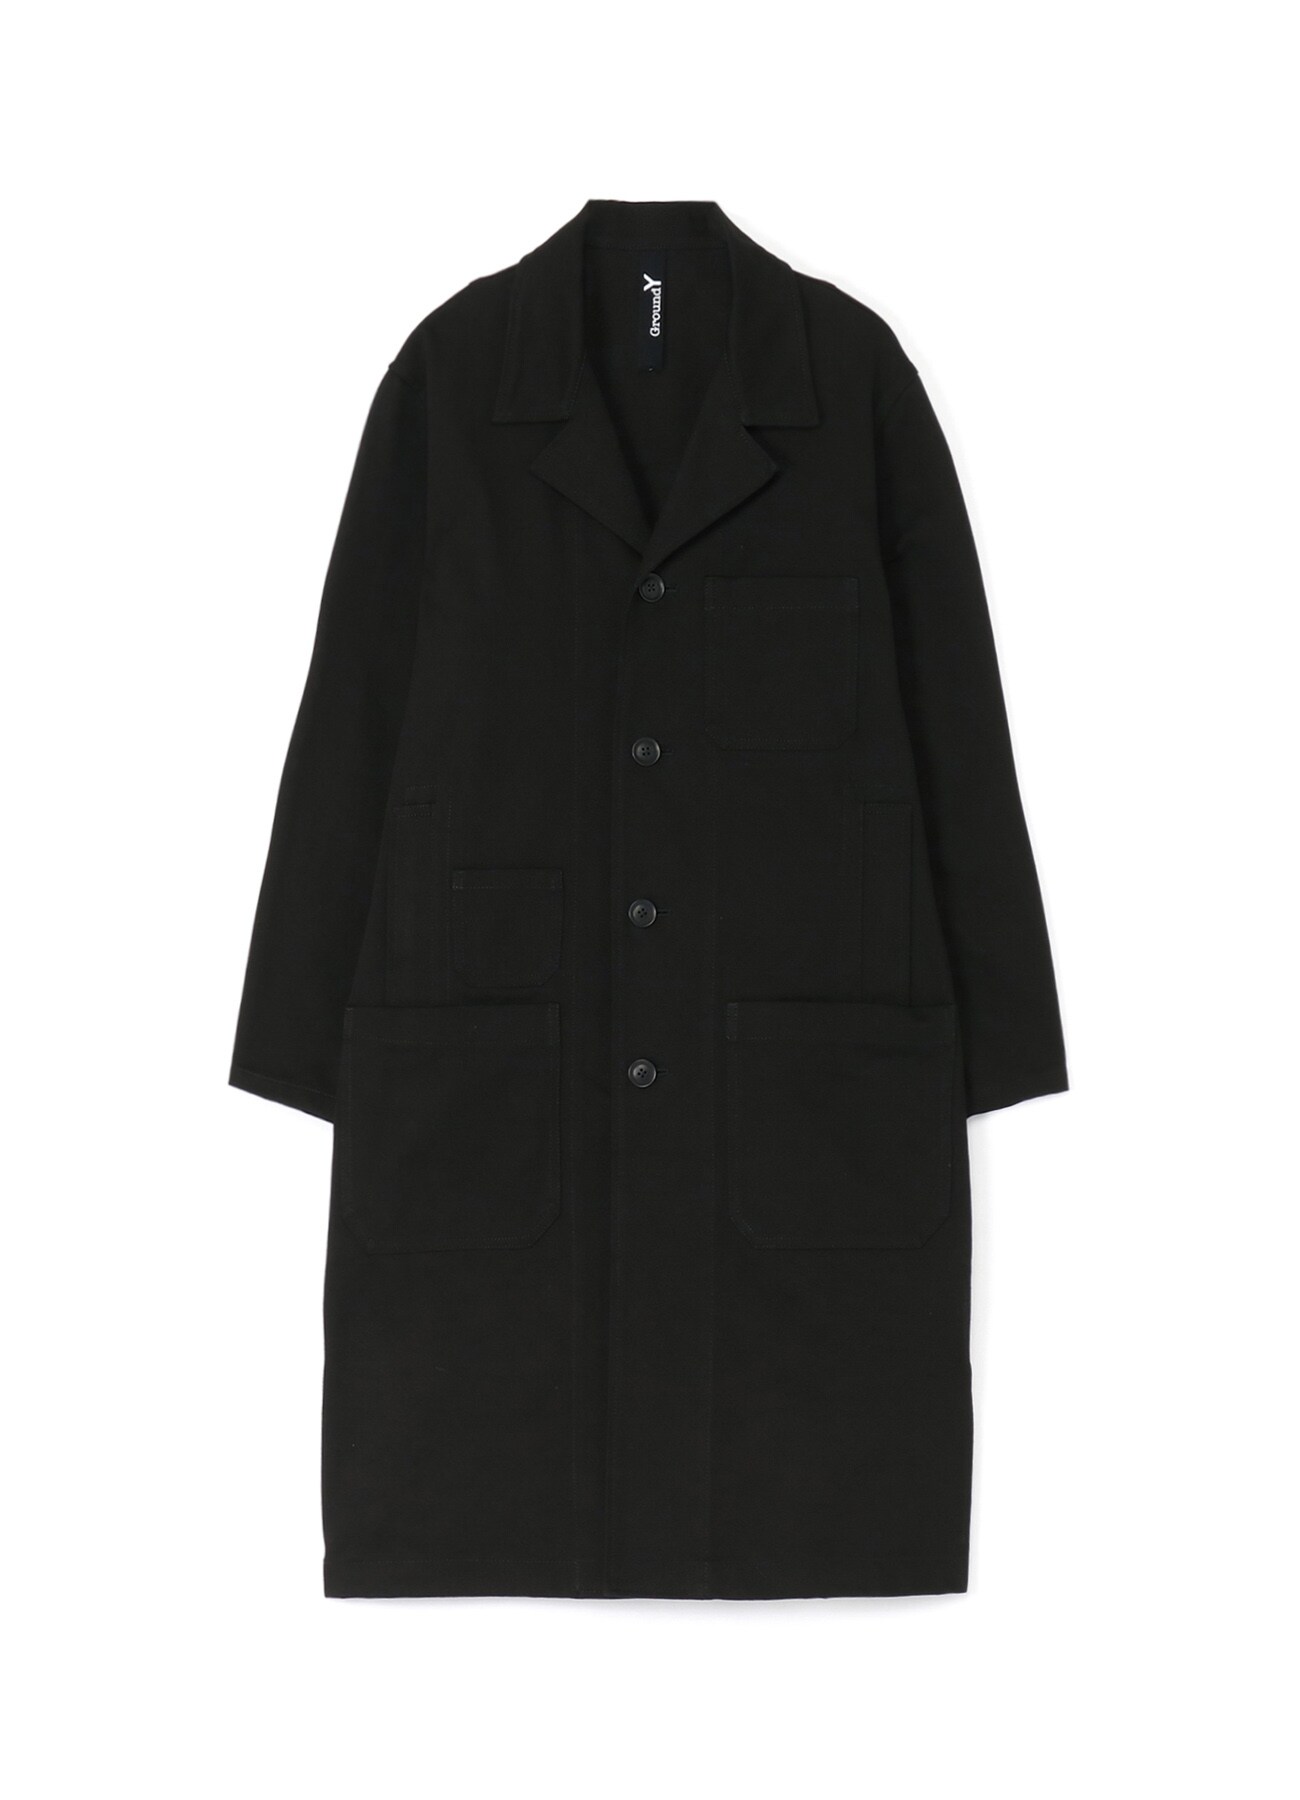 New Arrival | [Official] THE SHOP YOHJI YAMAMOTO (Page 2/3)